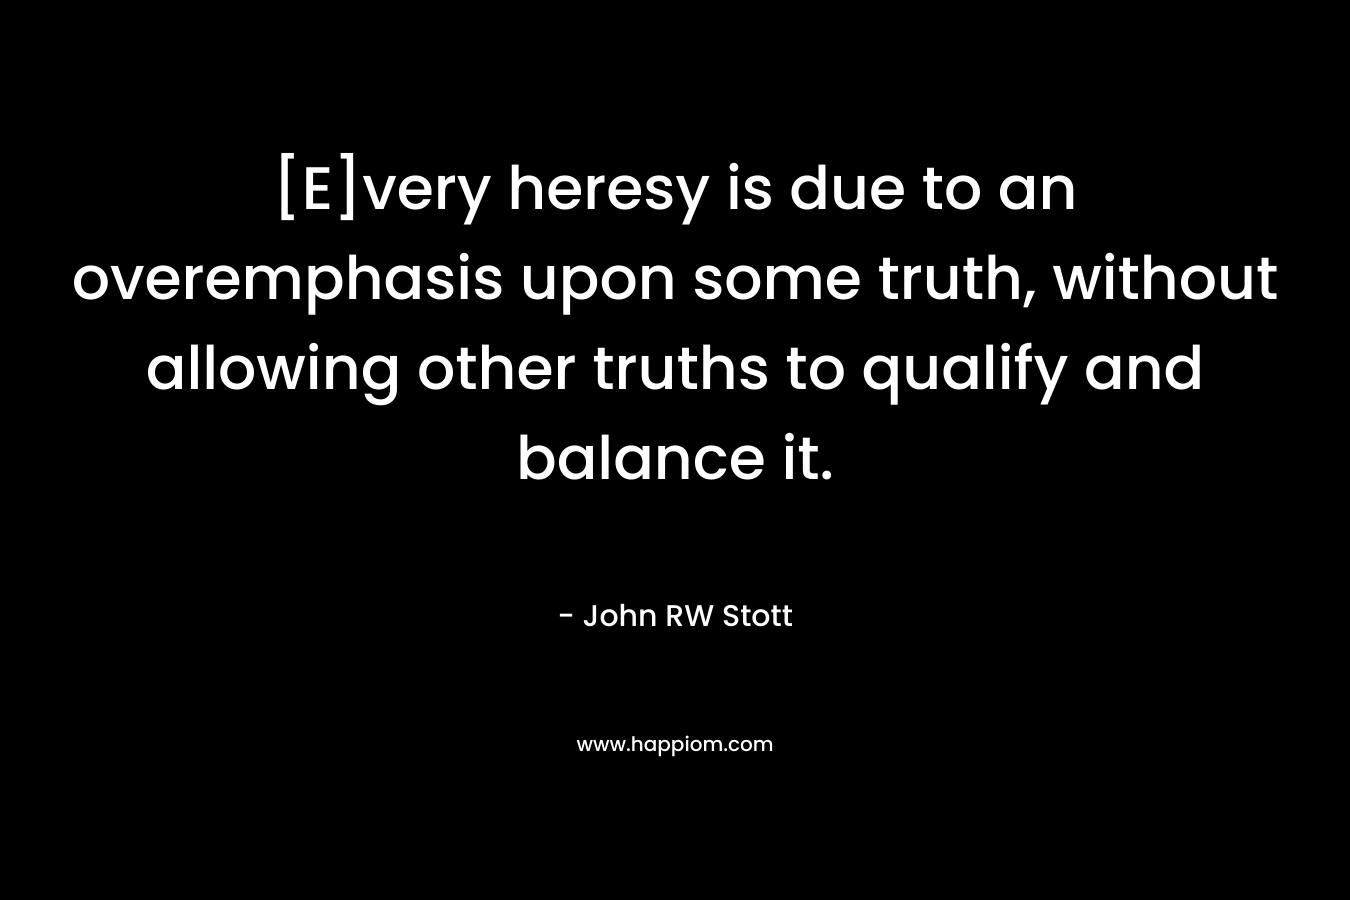 [E]very heresy is due to an overemphasis upon some truth, without allowing other truths to qualify and balance it. – John RW Stott